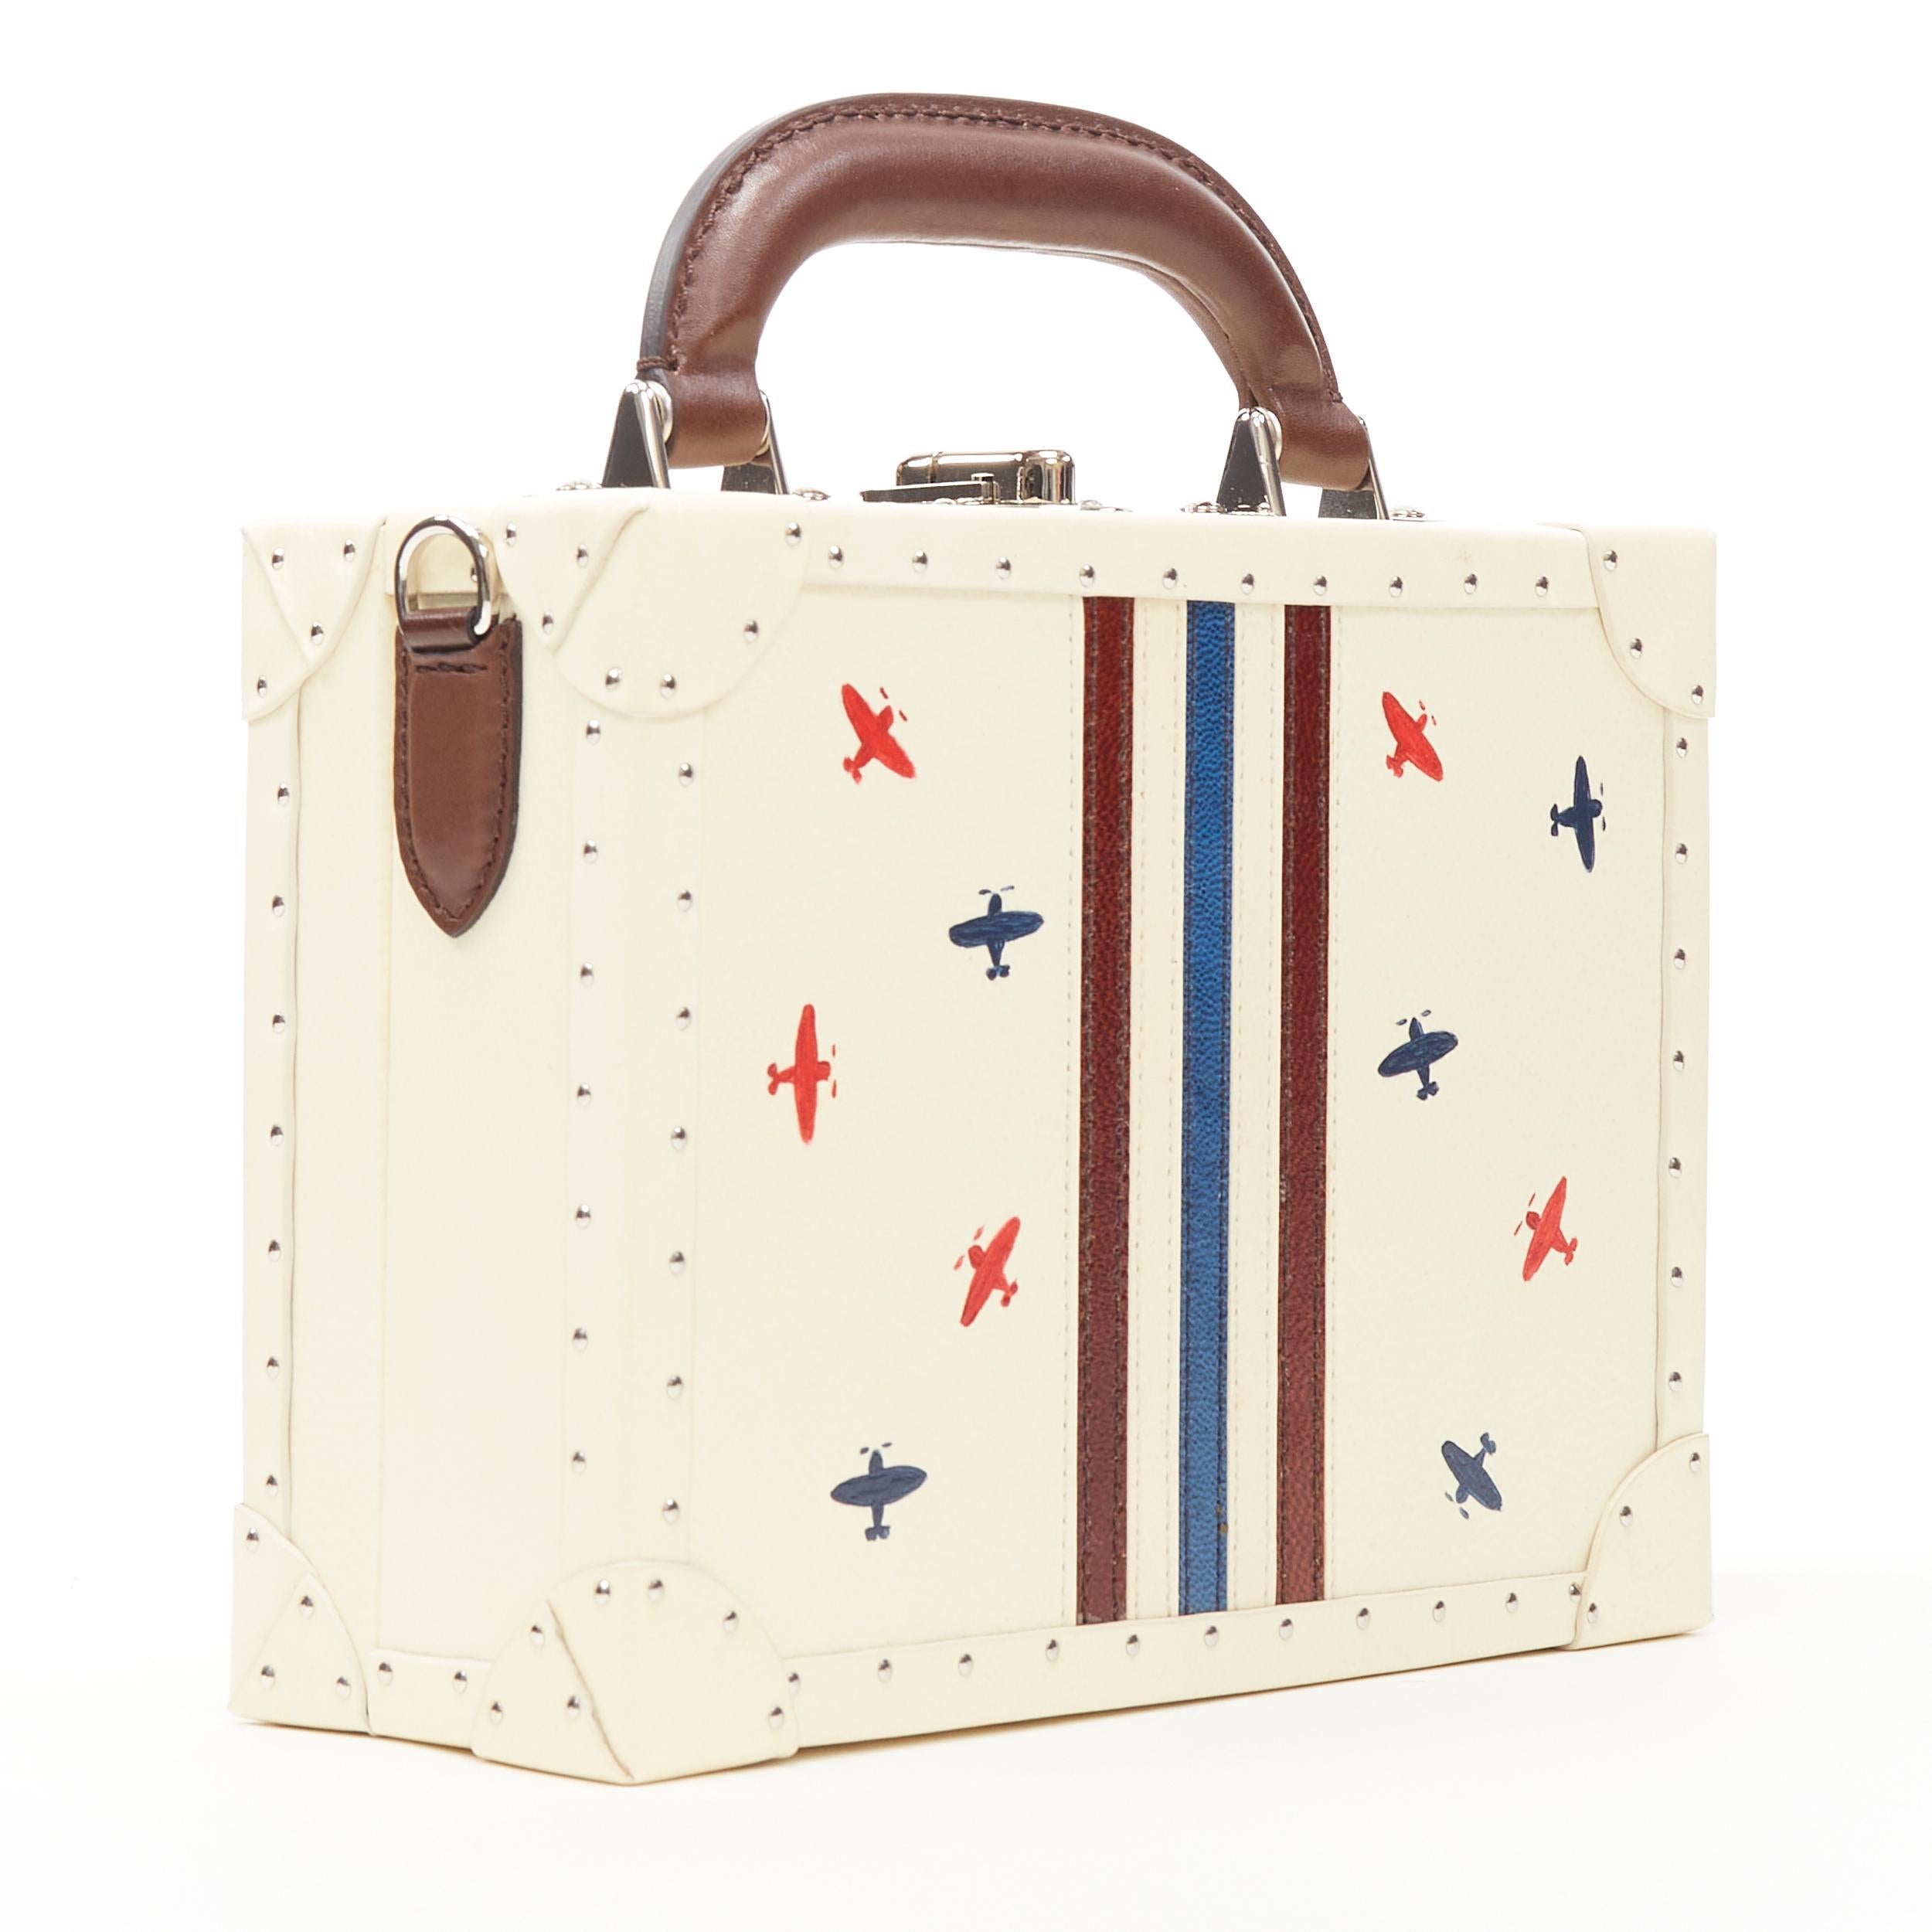 BERTONI 1949 hand painted fly print mini trunk shoulder box bag handmade 
Reference: LNKO/A01769 
Brand: Bertoni 1949 
Model: Box trunk bag 
Material: Leather 
Color: Beige 
Pattern: Abstract 
Closure: Clasp 
Extra Detail: Fly print box trunk. Beige